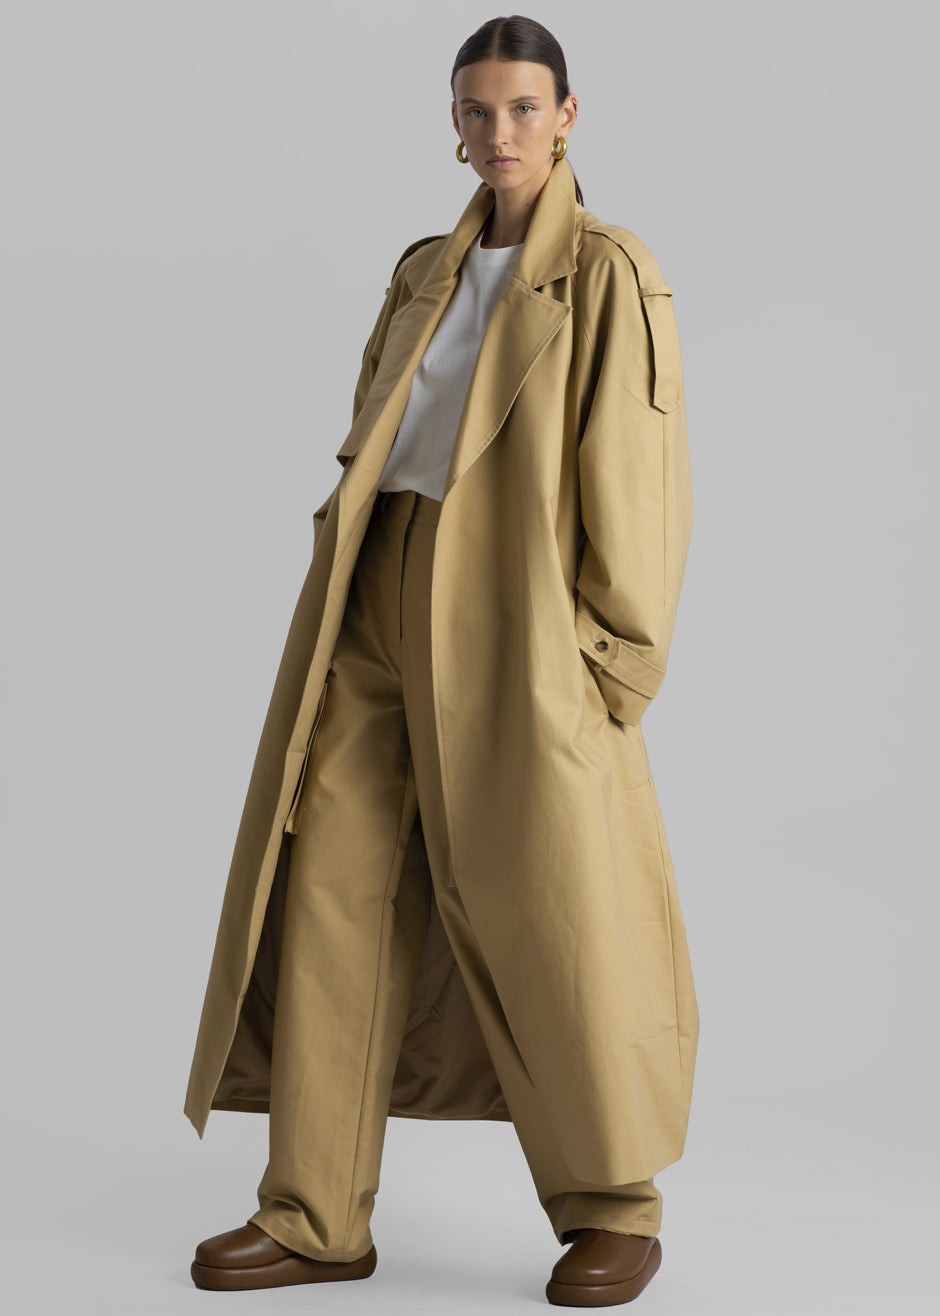 Suzanne Trench Coat - Beige - 5